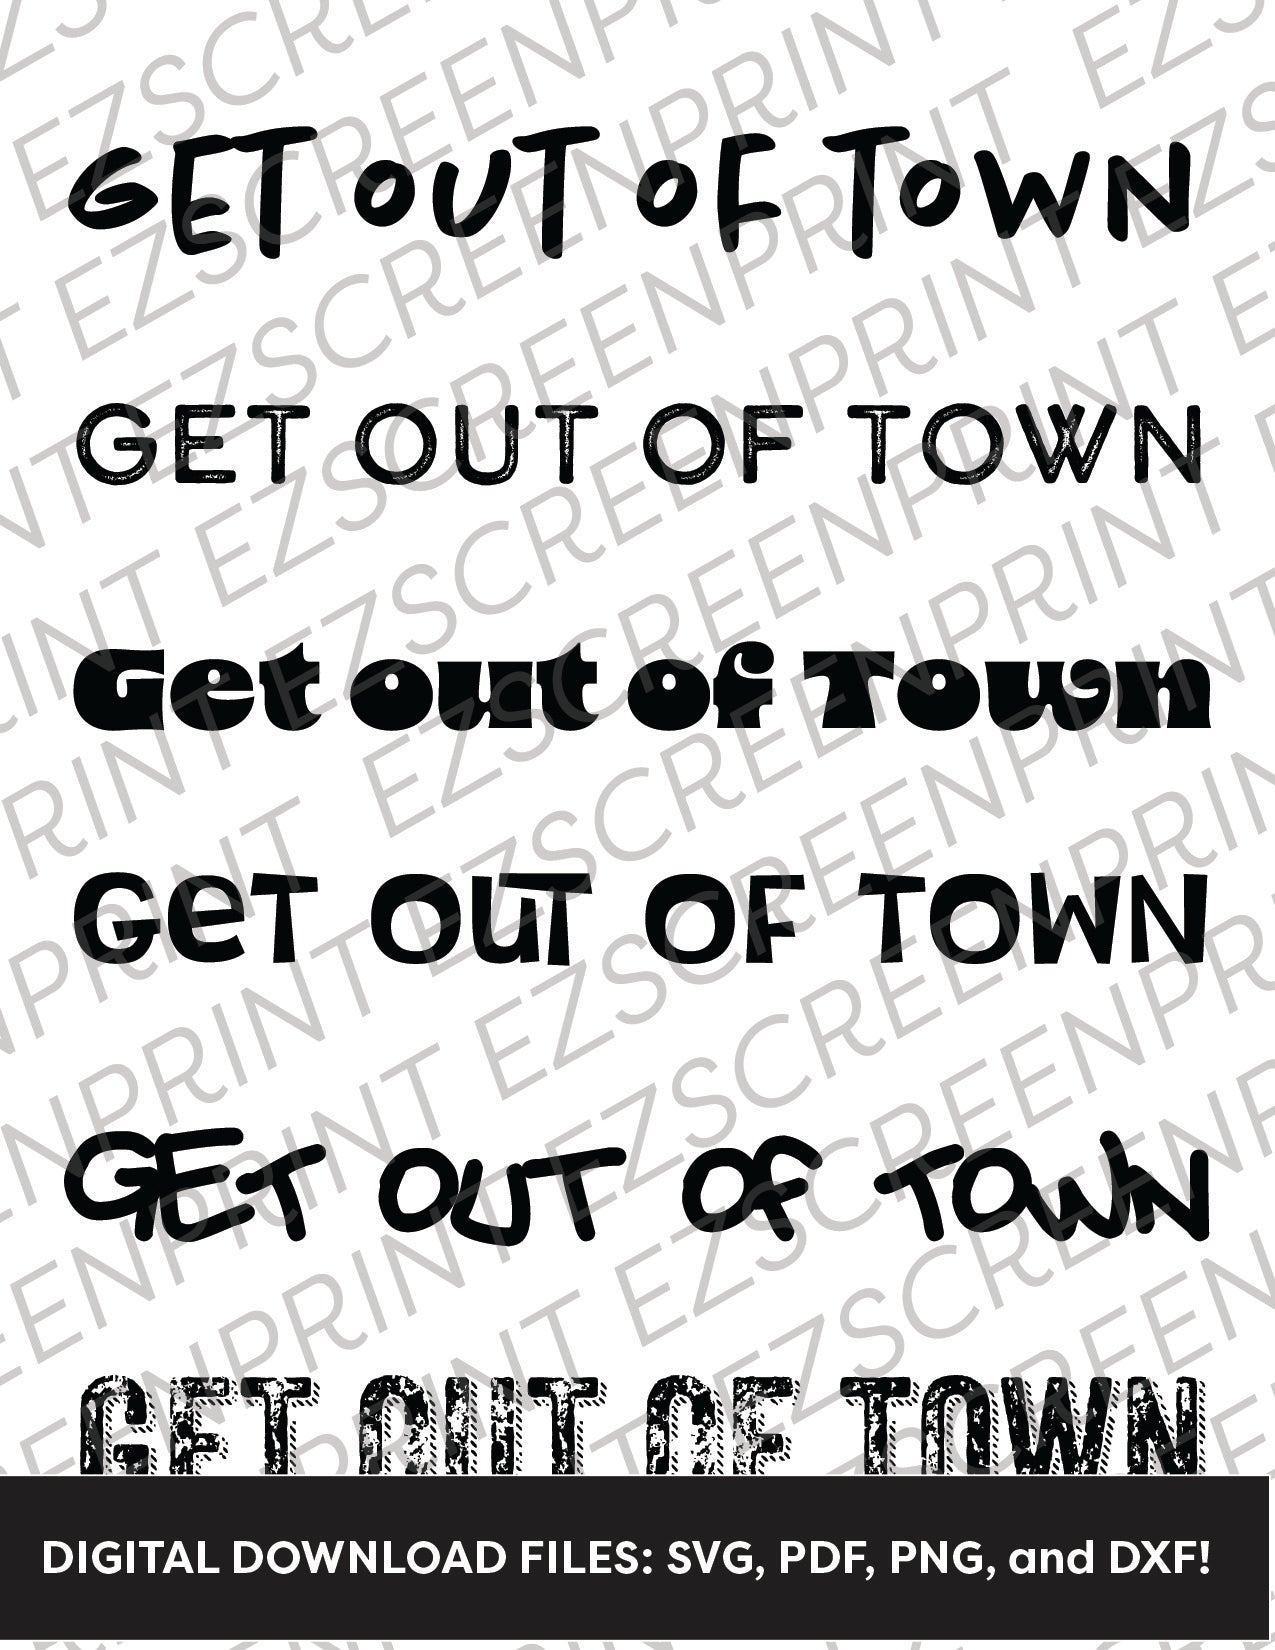 Get Out of Town Phrase Pack, Various Sizes + Digital Download